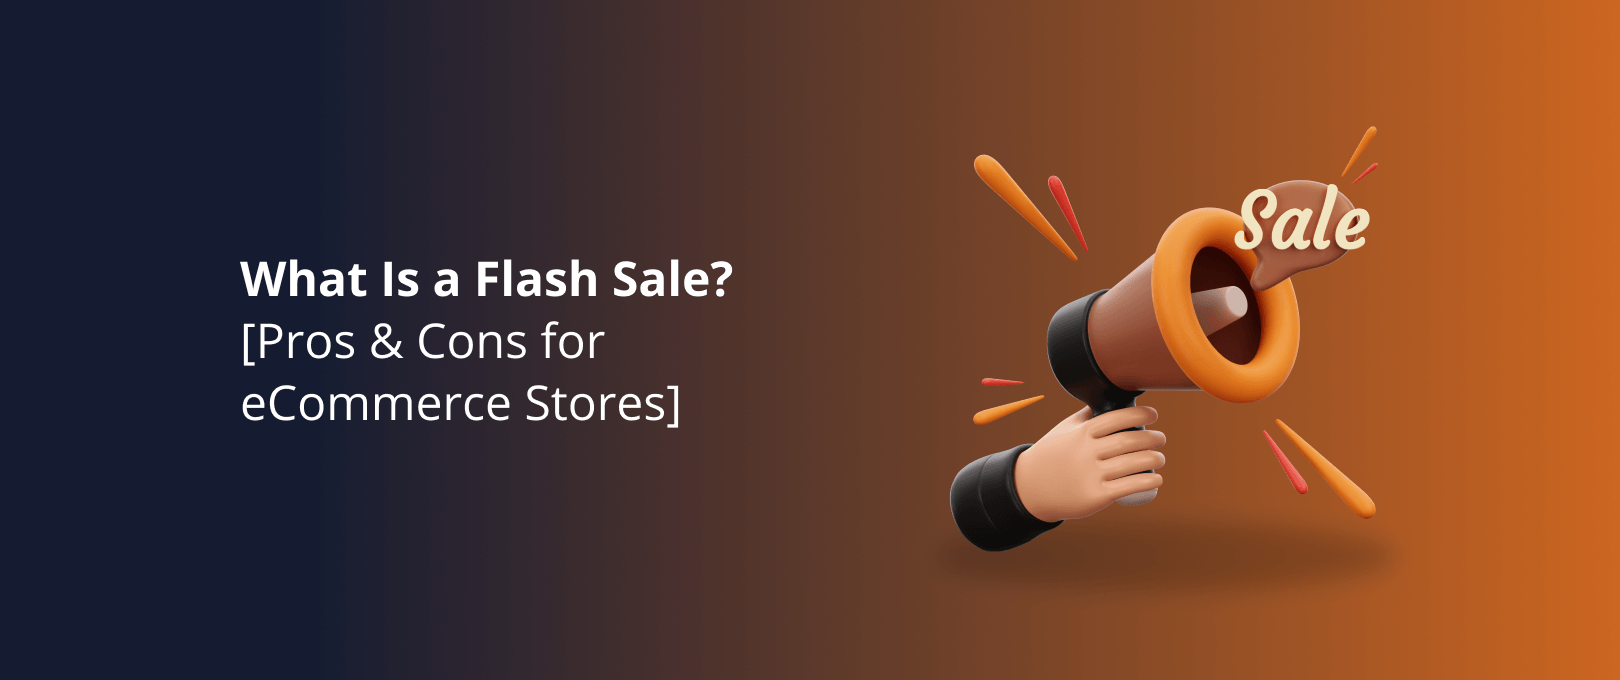 Flash Sale Today